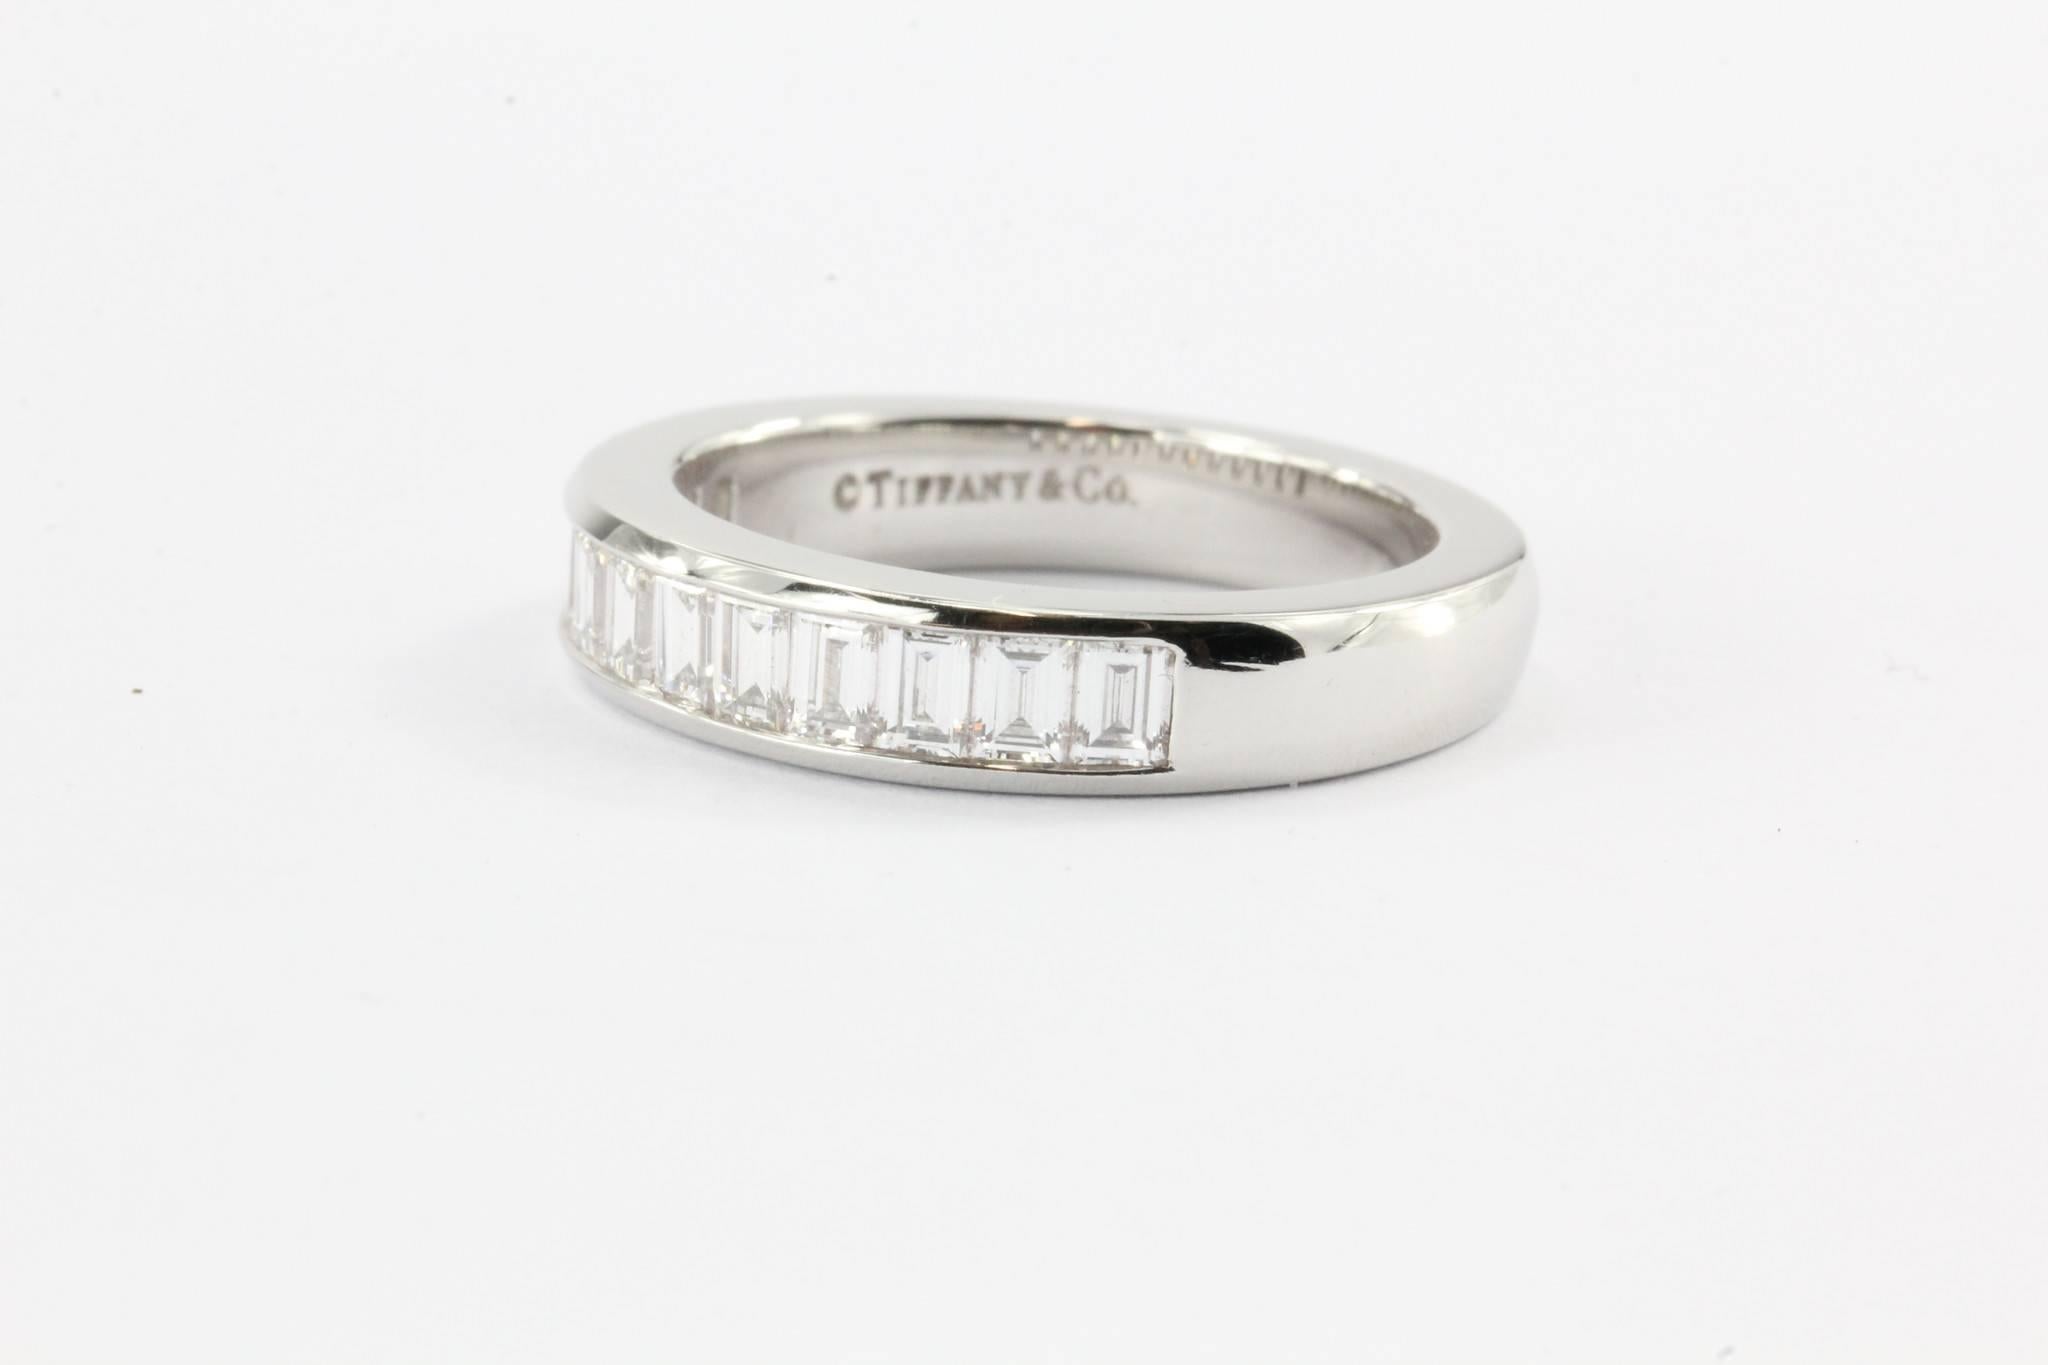 Channel-set band ring with a half circle of baguette diamonds in platinum. 3 mm wide.
Ring size 6
Diamonds carat total weight: .96 
VS1 clarity, G color
Band still sold in stores!
Retail price: $6025